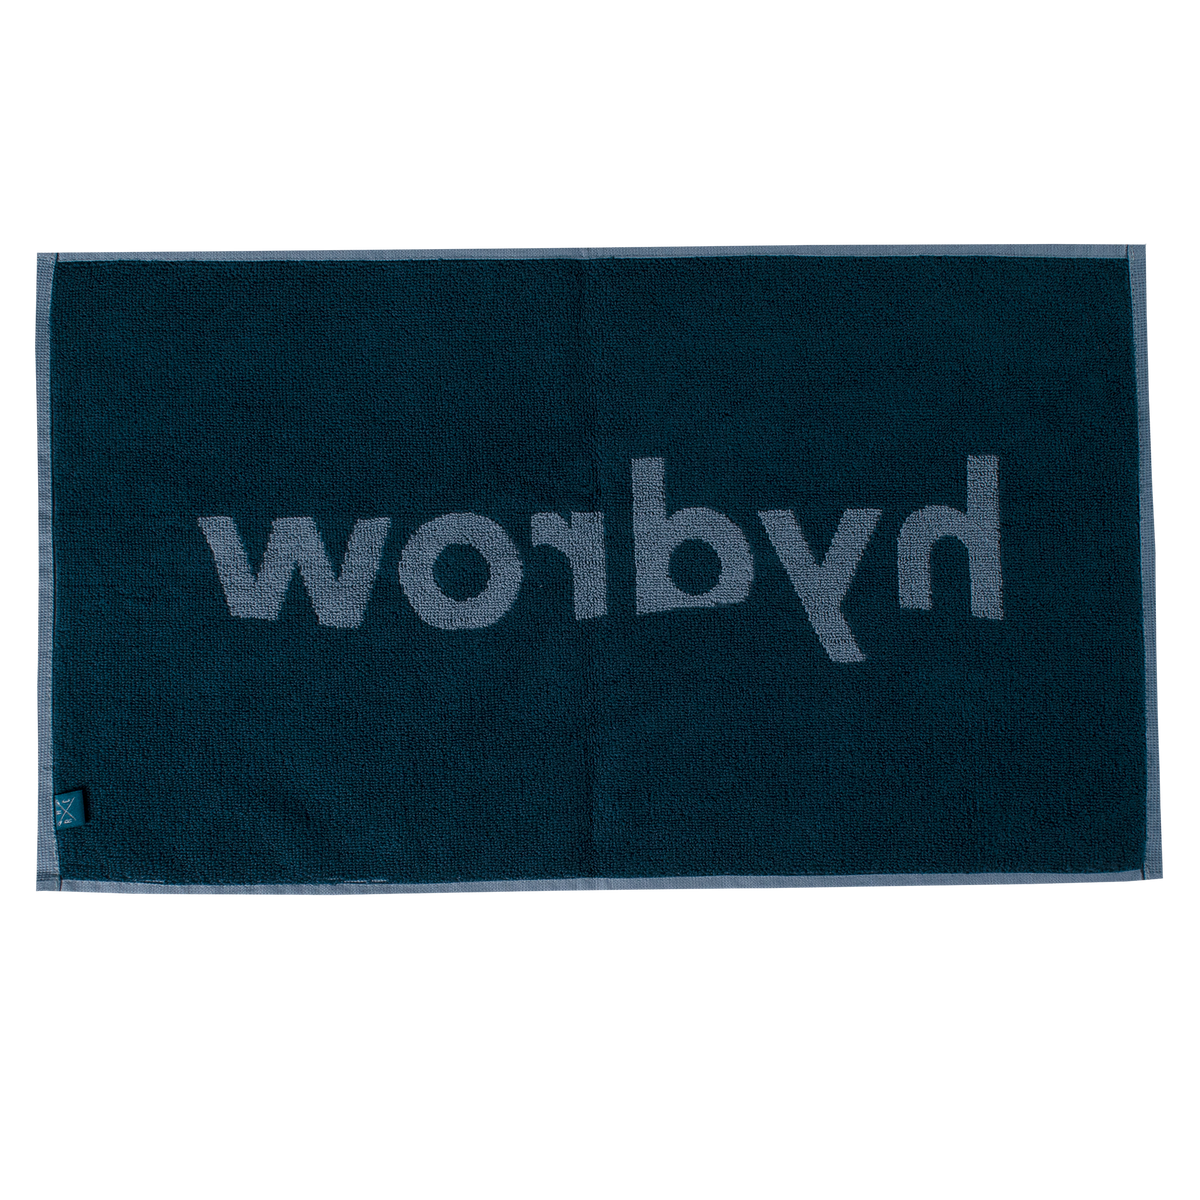 back view of blue gym towel with hydrow logo and crossed oars small woven label